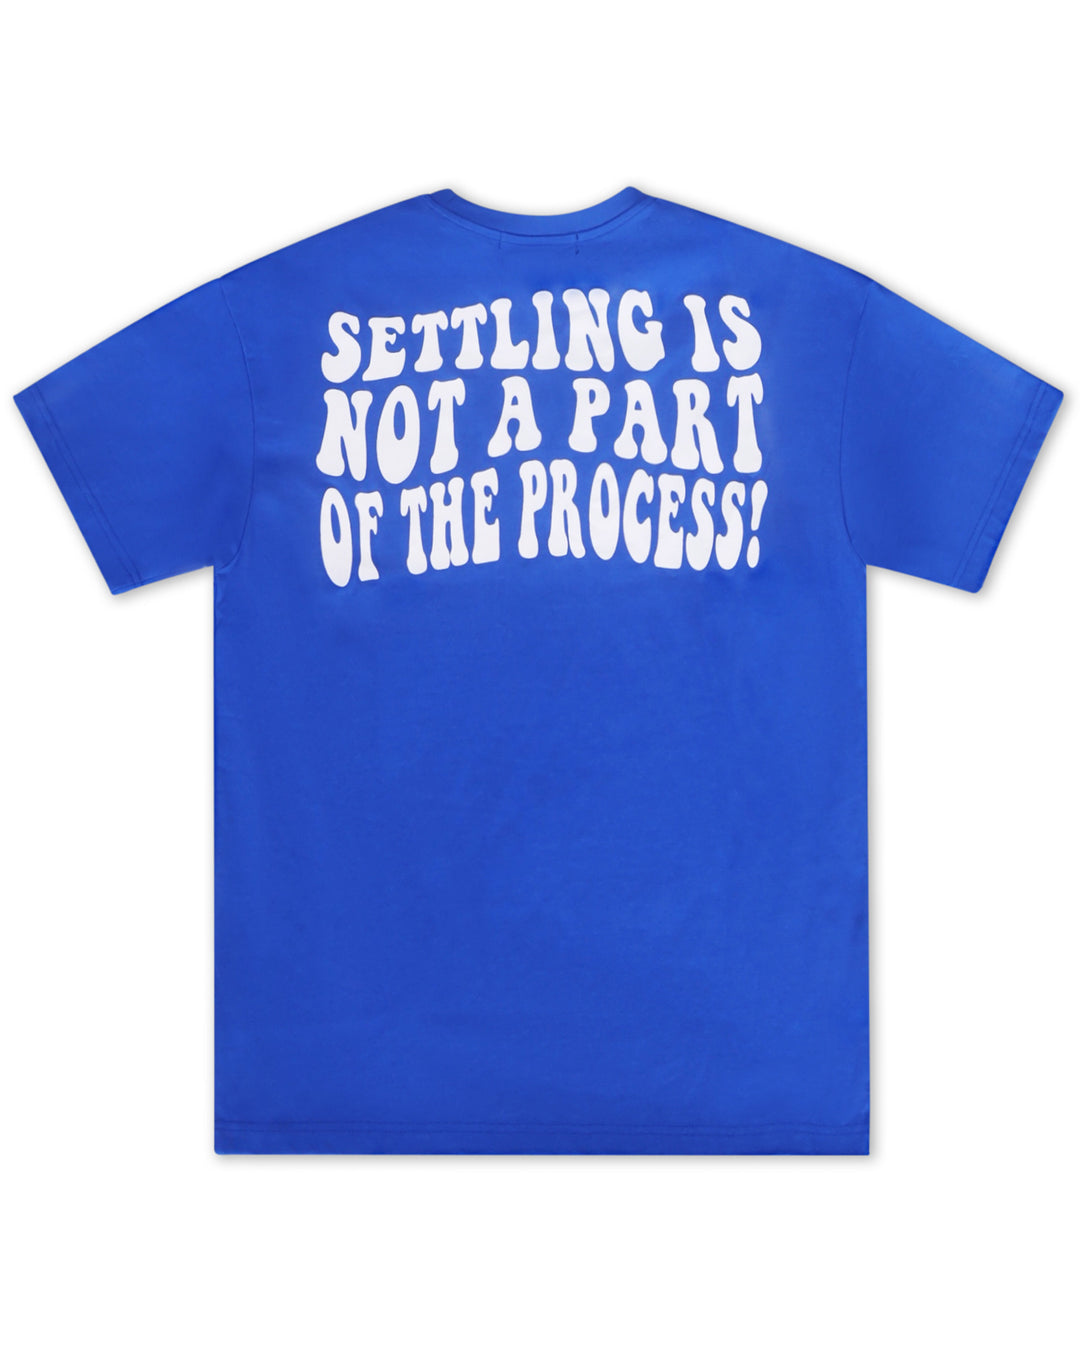 Process Tee in Royal/White